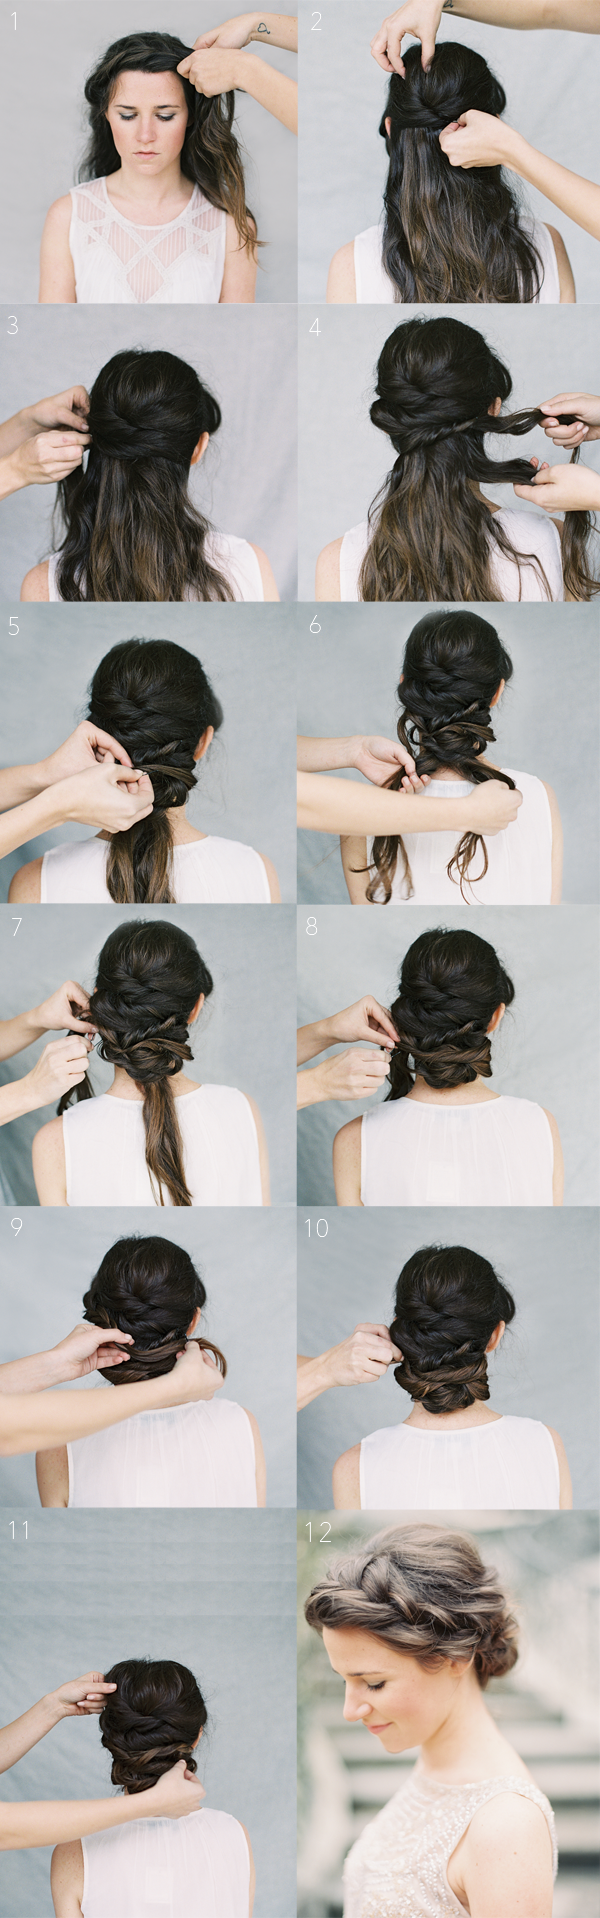 22 Gorgeous Hairstyle Ideas and Tutorials for New Year’s Eve (2)